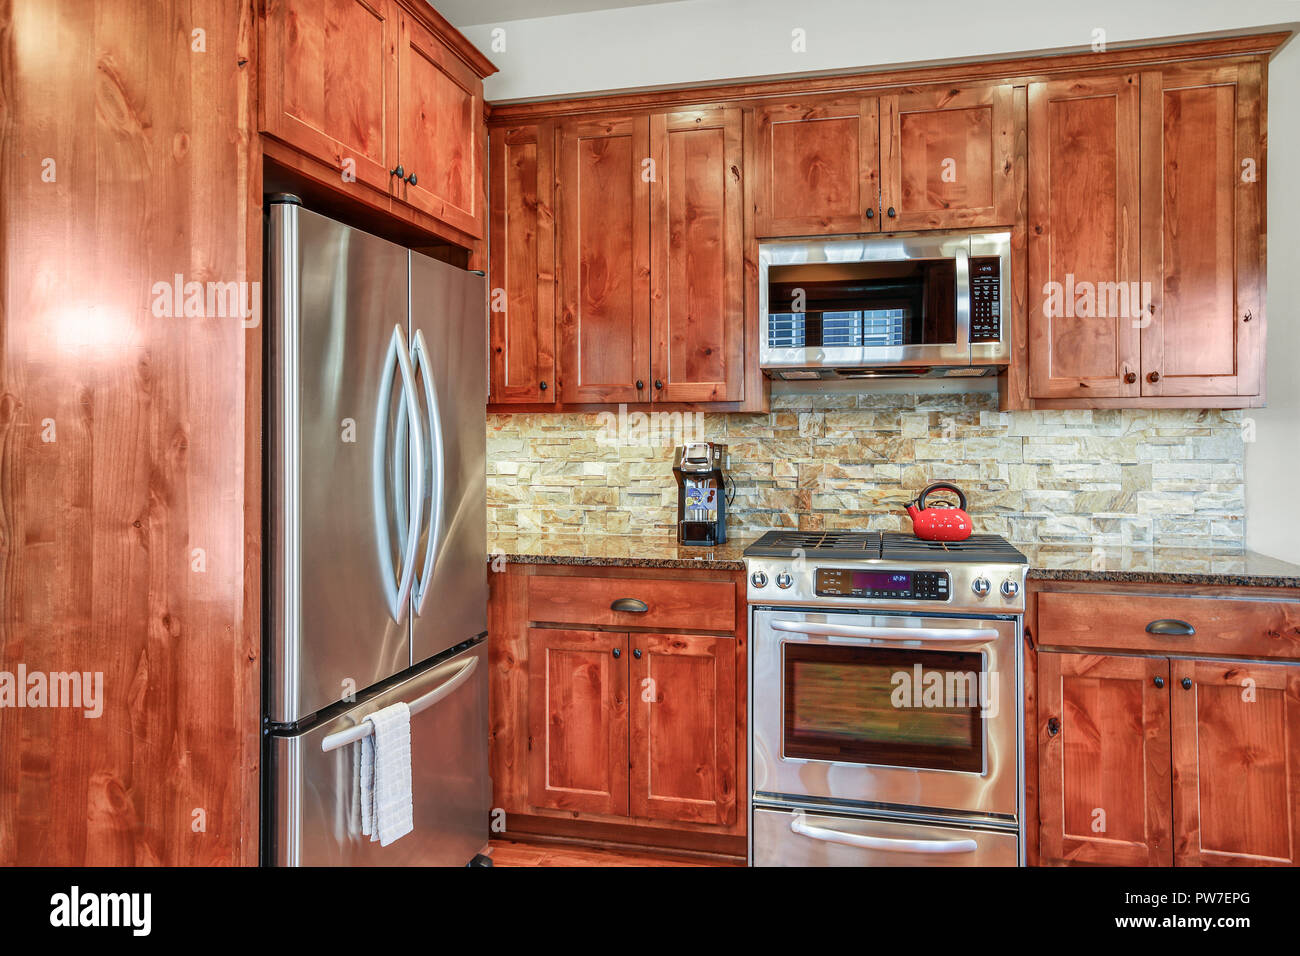 Wooden Kitchen Room With Stone Backsplash Granite Countertops And